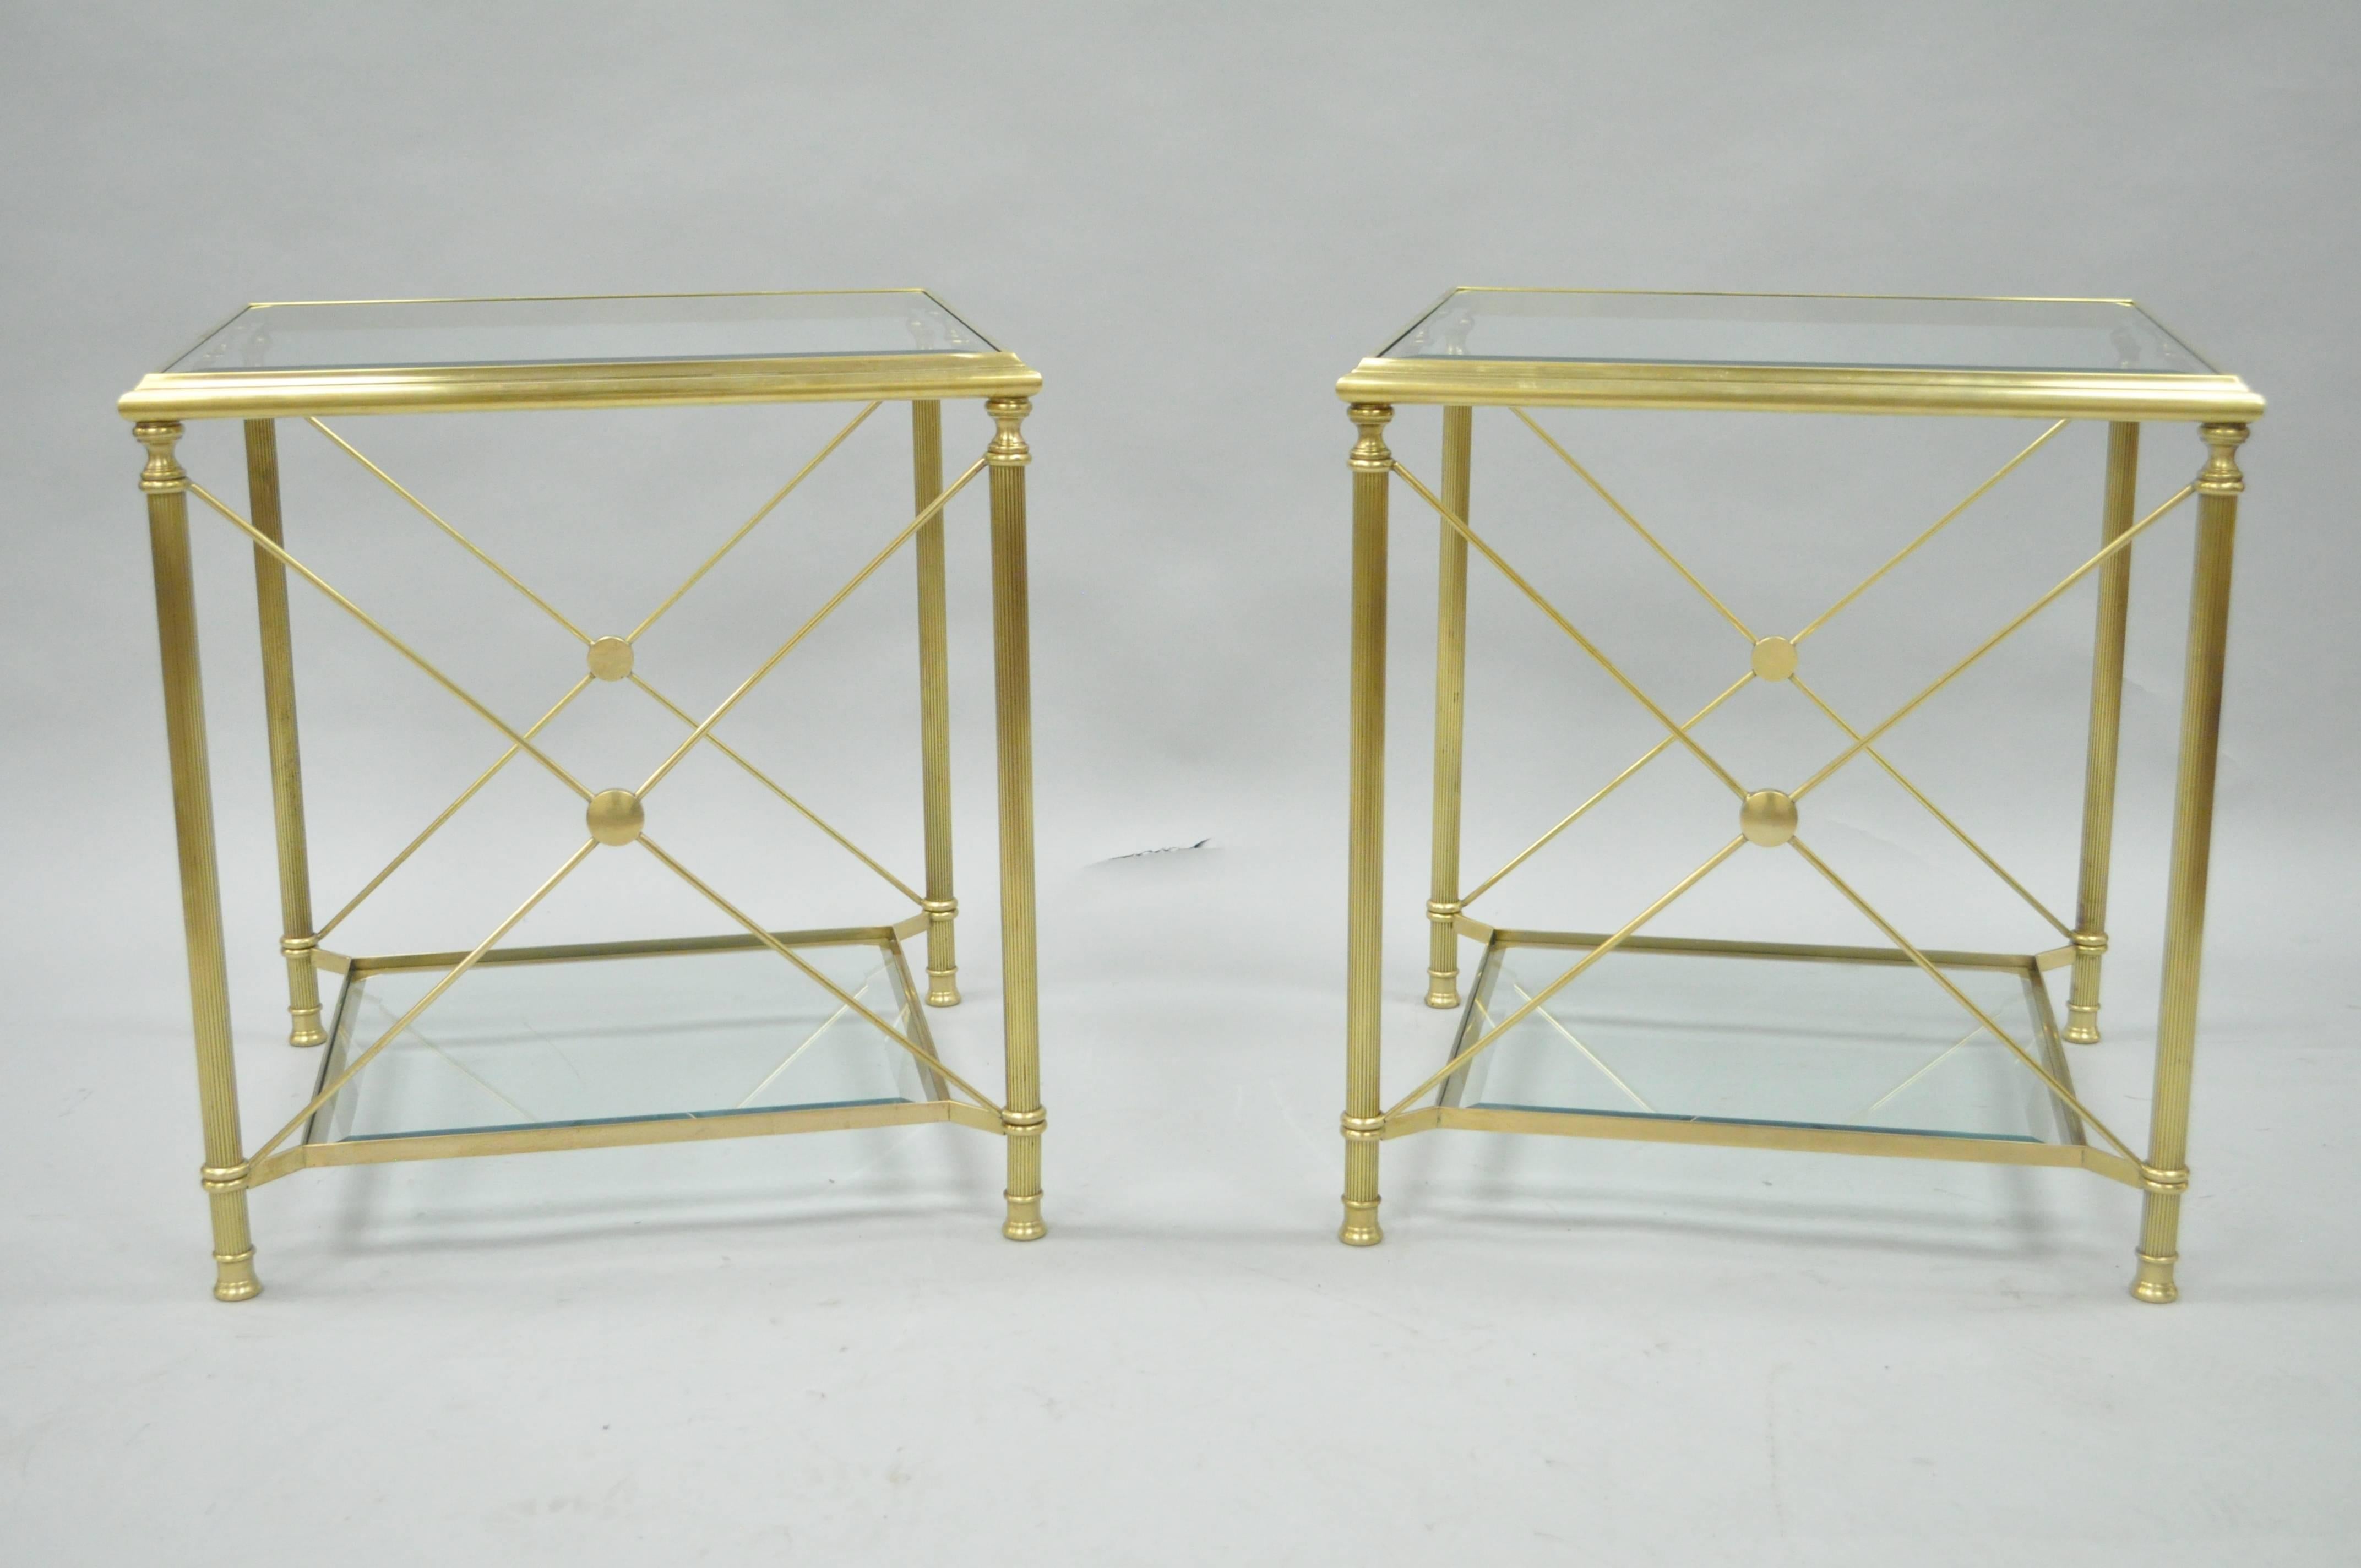 Quality pair of two-tier brass and glass neoclassical style X-form Mid-Century square side tables. Tables feature two-tier brass frames with inset beveled glass, two X-form sides and two open sides, reeded column-form legs, lower tier with extended